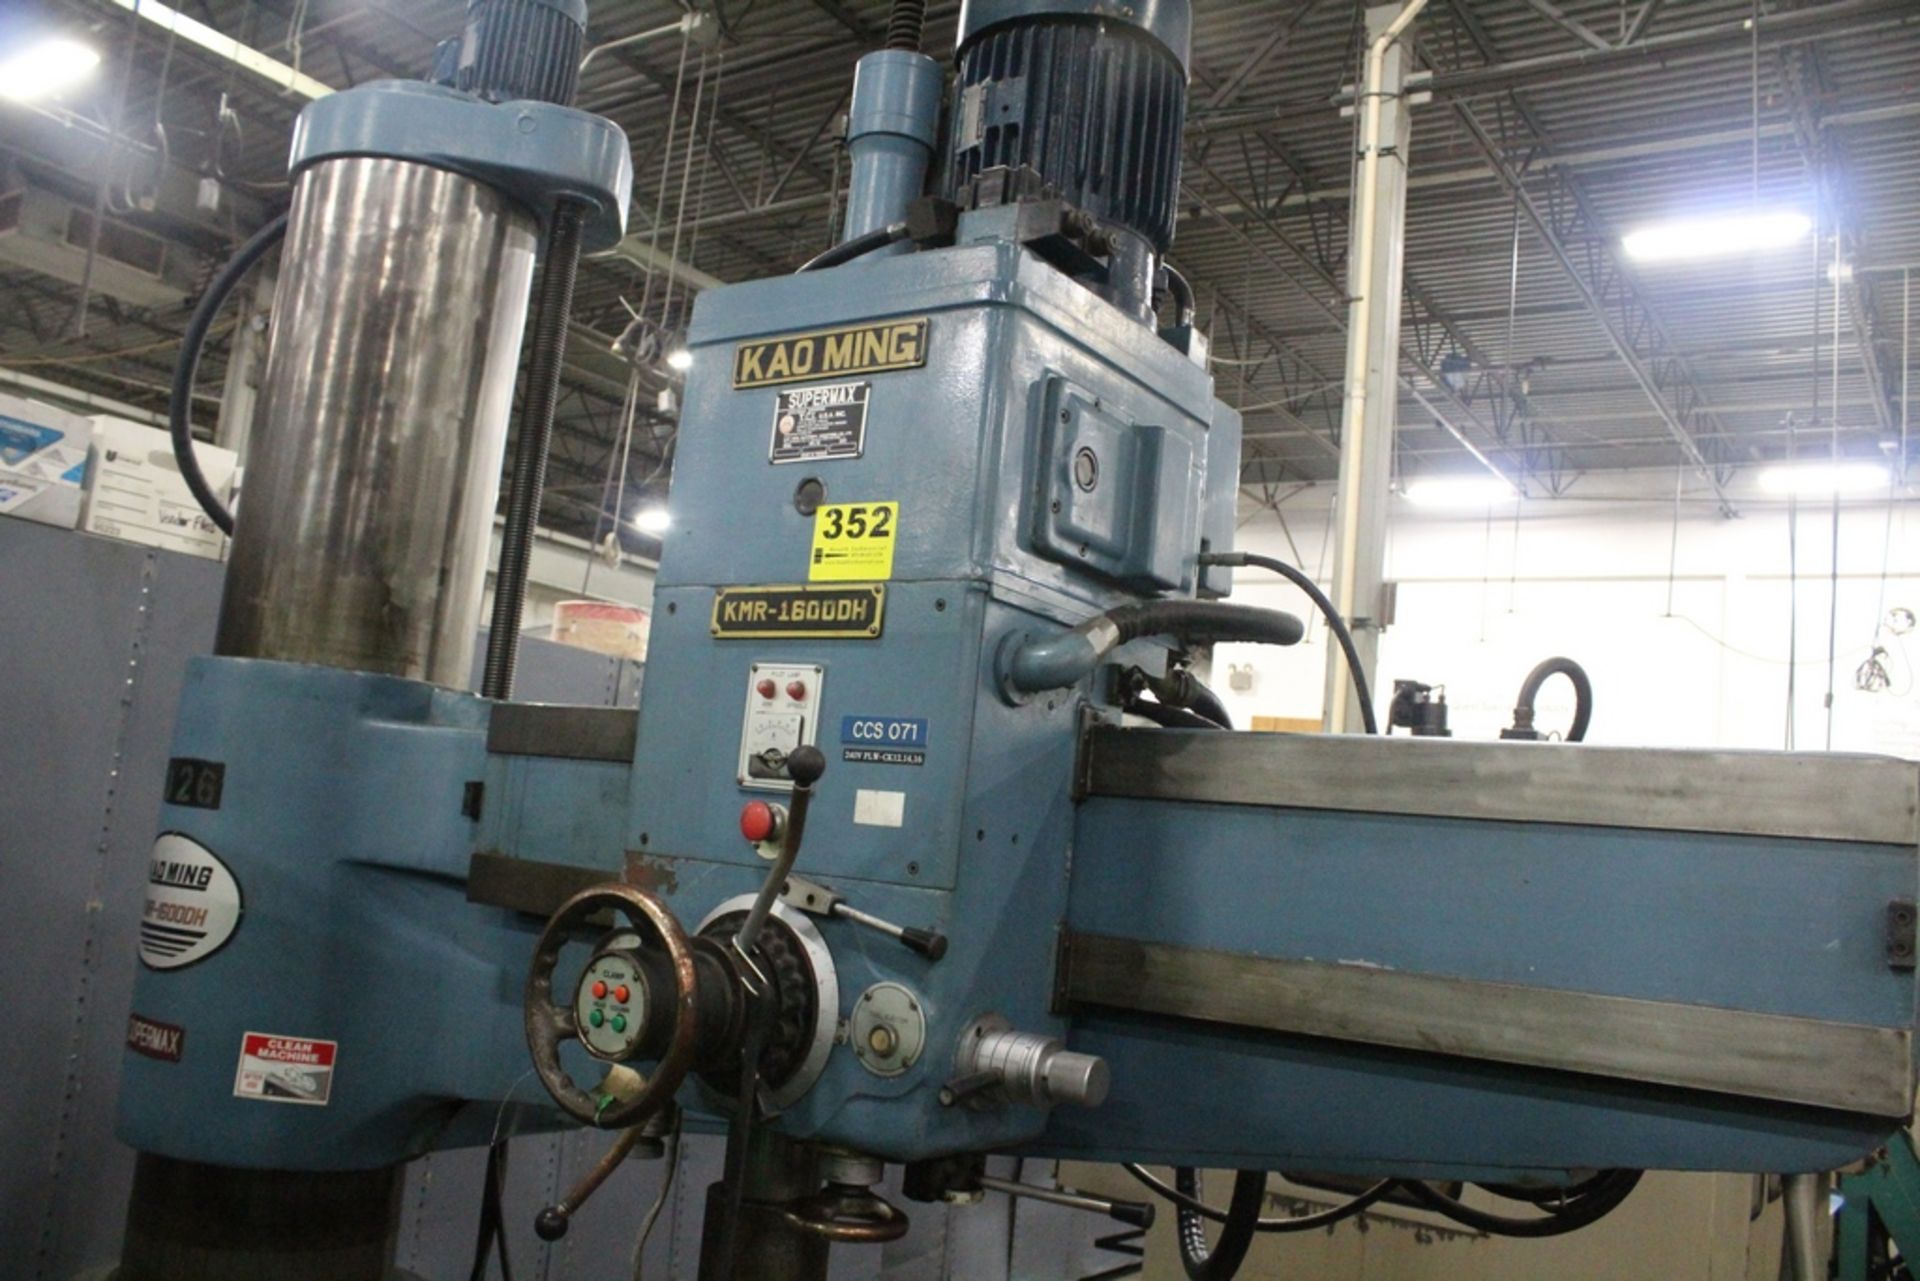 KAO MING MODEL KMR-1600DH SUPERMAX RADIAL ARM DRILL, 5' X 16" COLUMN, S/N 1888 (SHIPPING WEIGHT 10, - Bild 2 aus 6